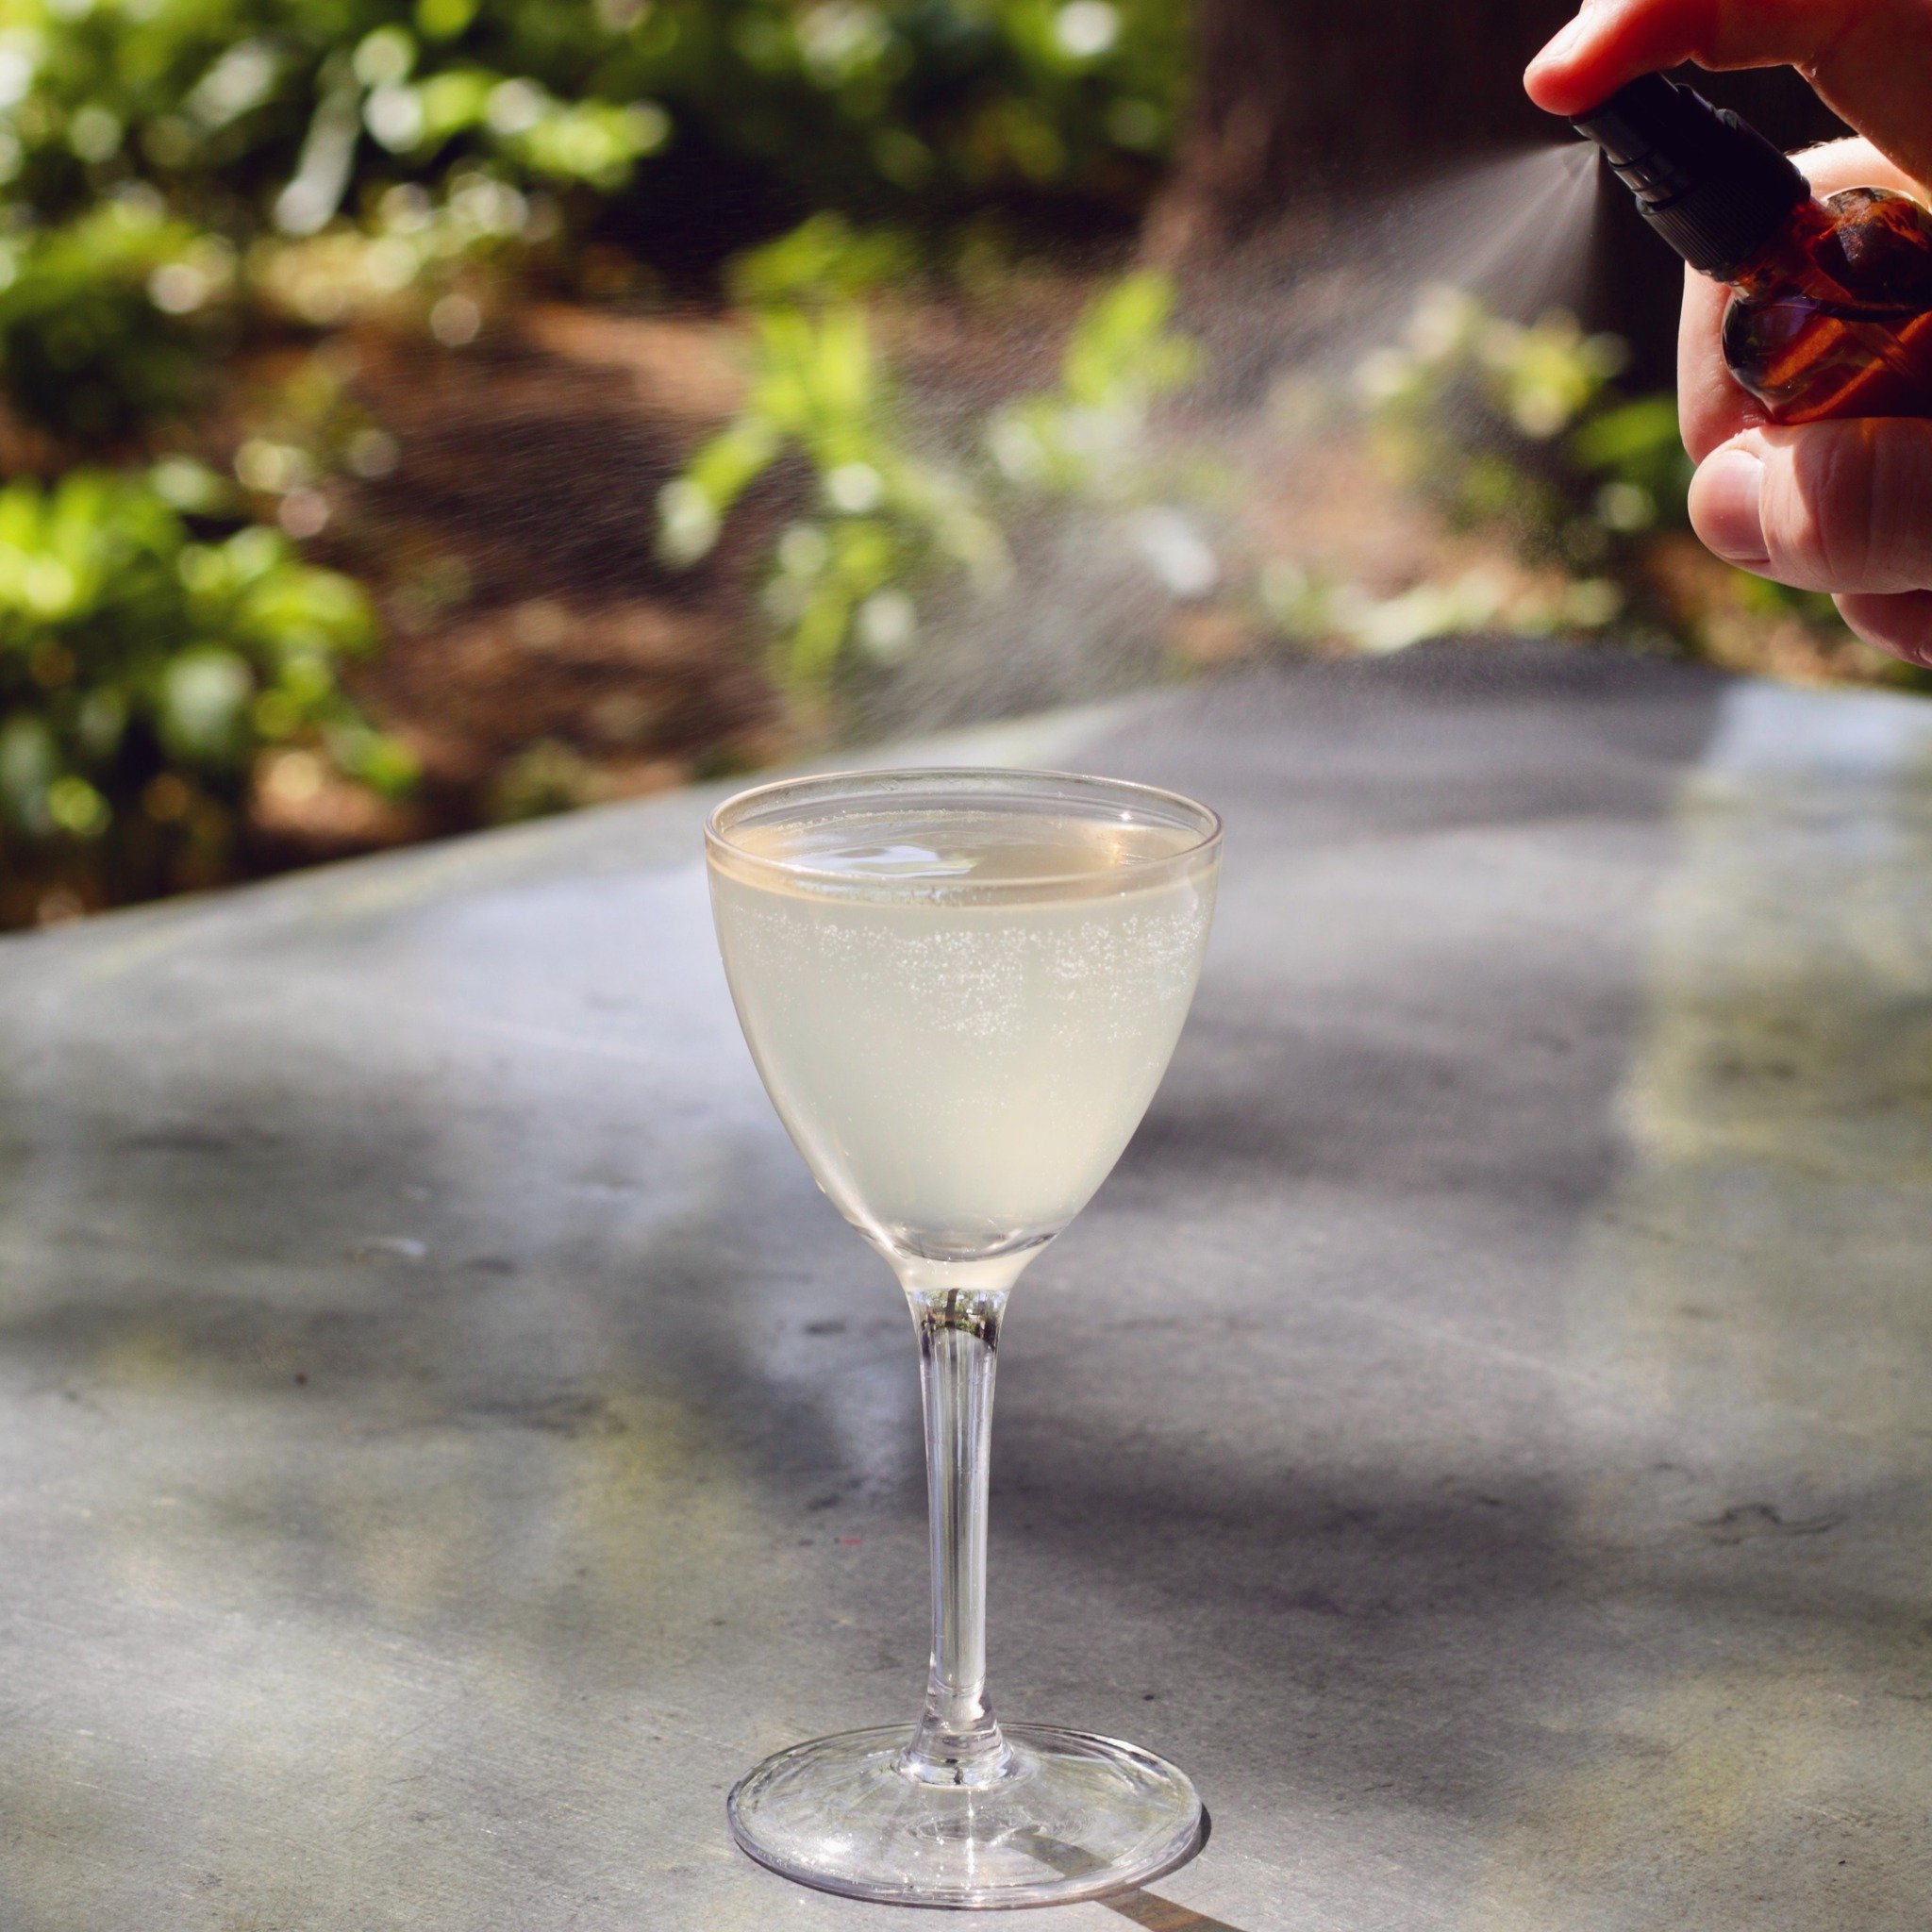 The Misty in Love 💜

Named for the 1959 jazz standard, &ldquo;Misty,&rdquo; made most famous by Ella Fitzgerald, this cocktail is an elegant and floral riff on the classic French 75. Gin, lemon, house-made lavender syrup, and vanilla liqueur, topped